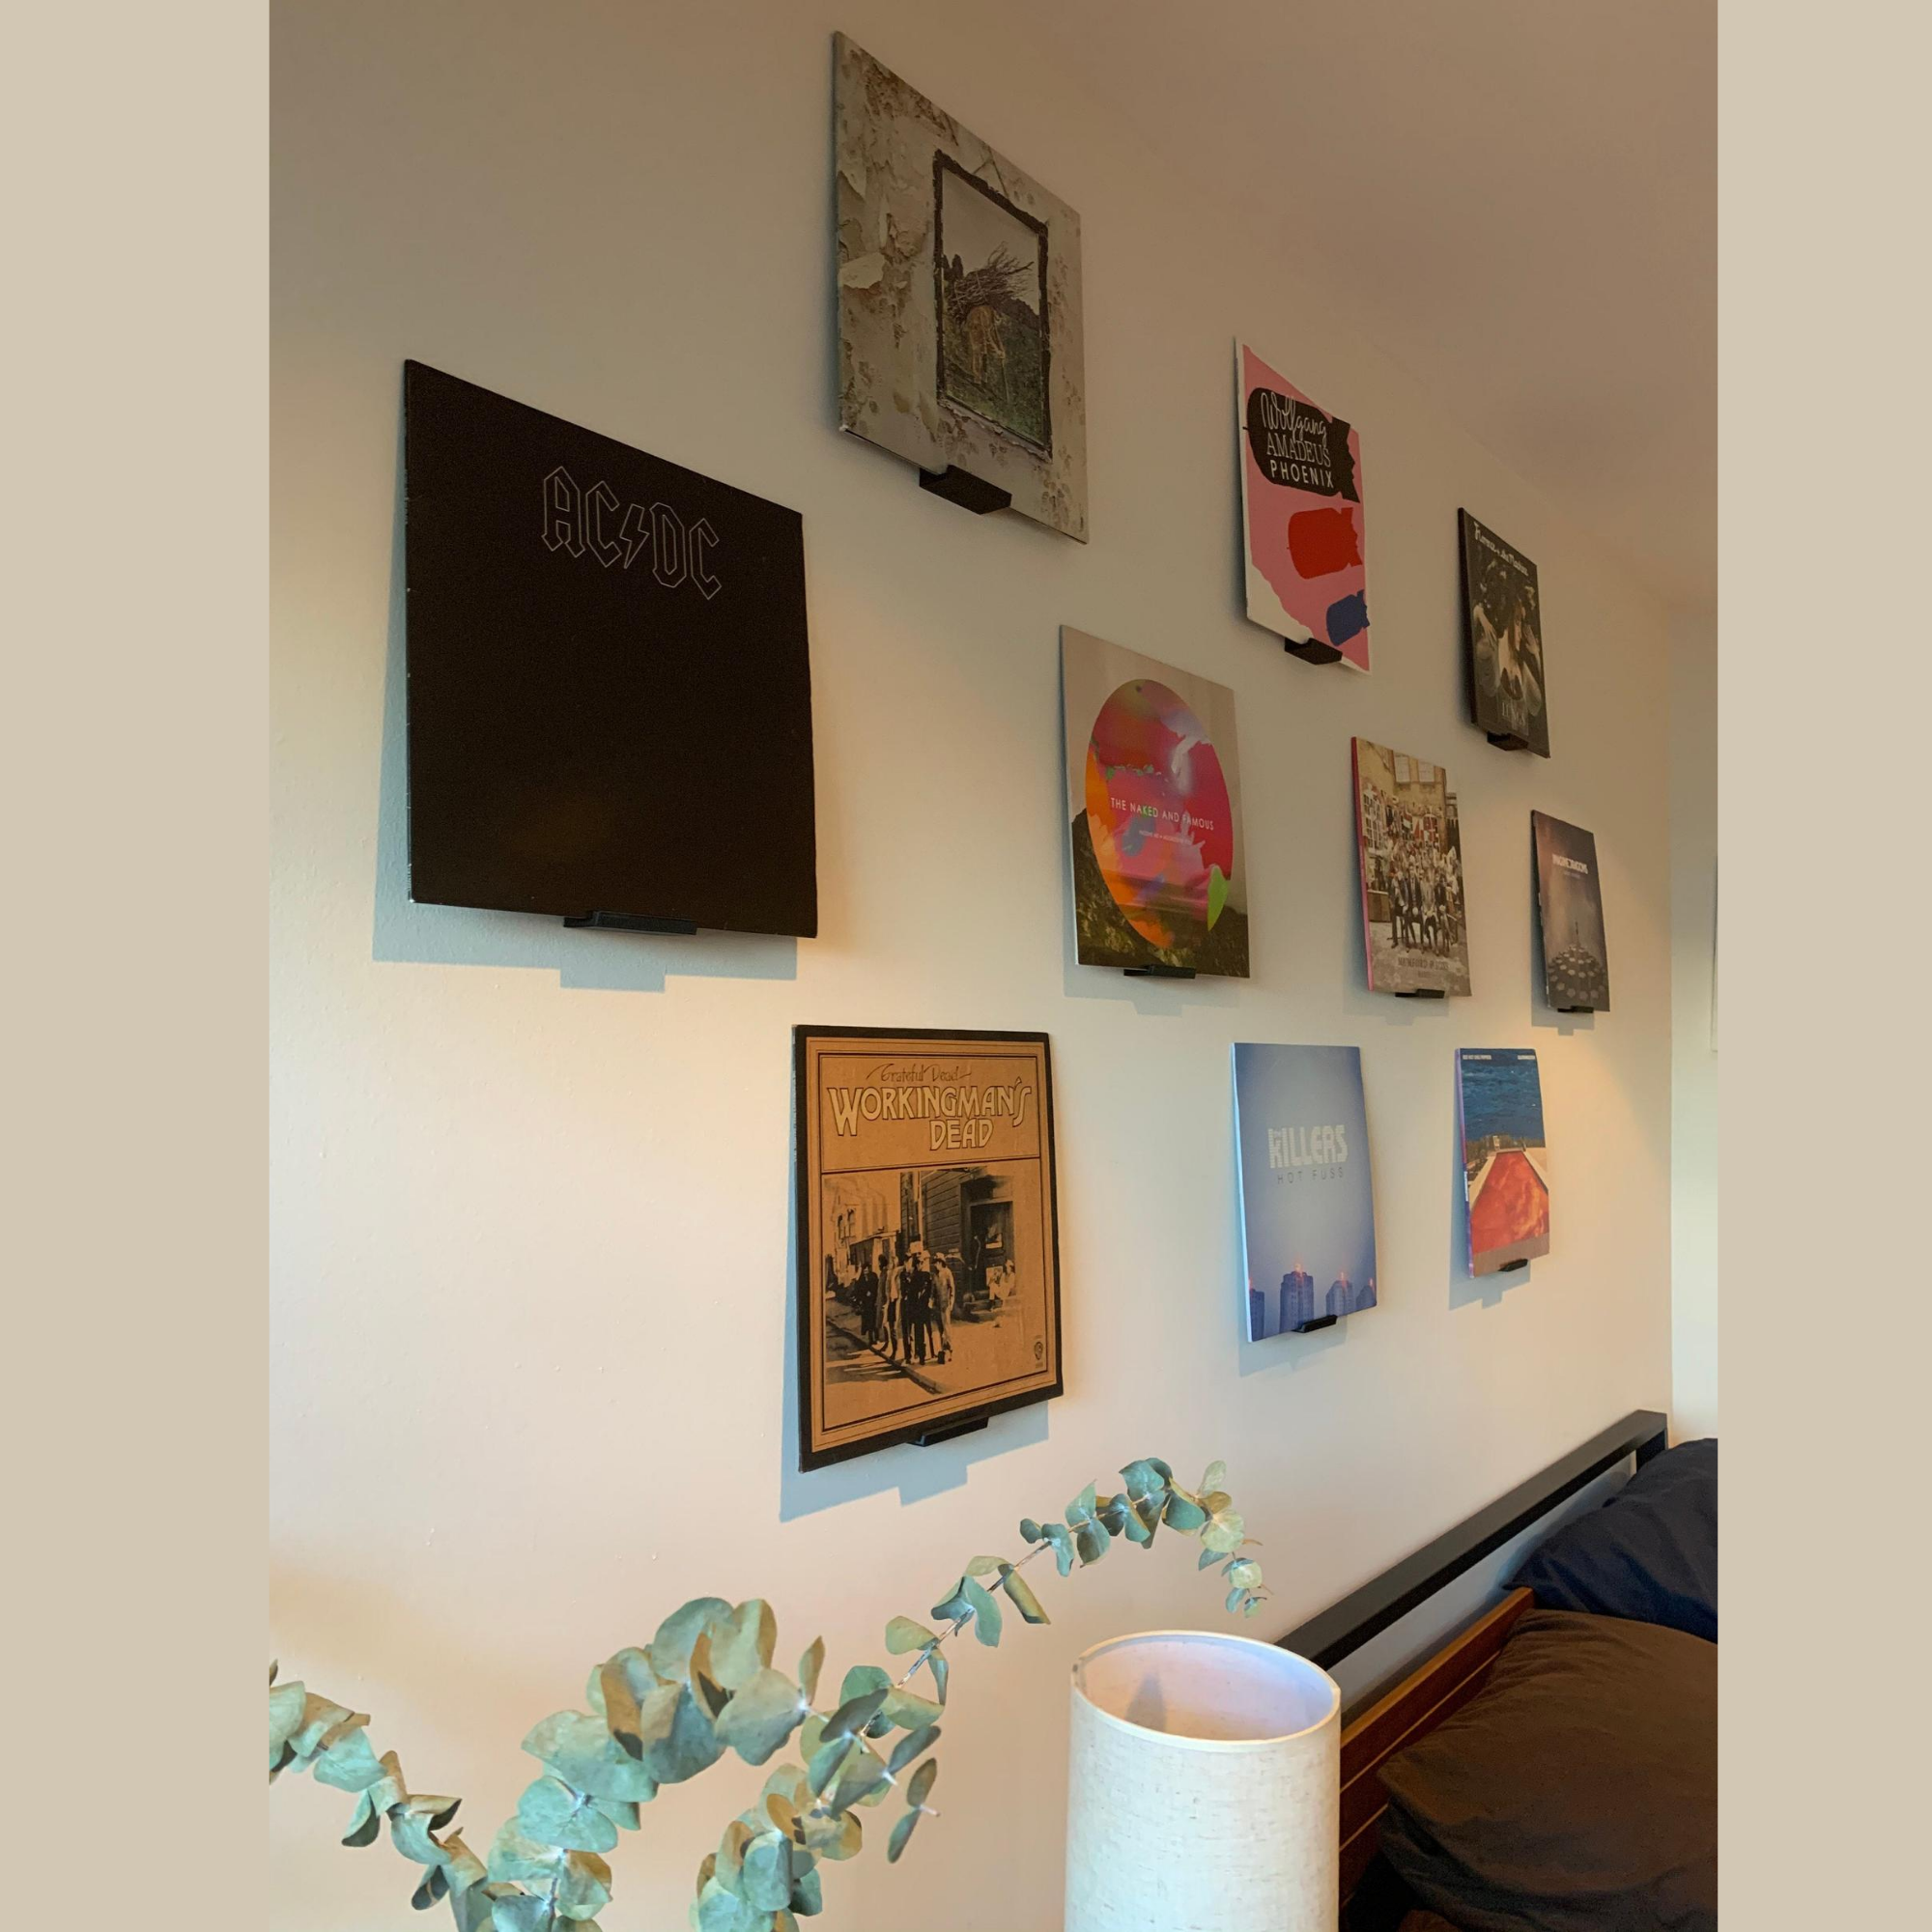 PERFECT FOR RENTERS Vinyl Record Album Display/wall Mount Damage-free Holders  Wall Tape Included 2 ,5, 10 Packs 3D Printed 